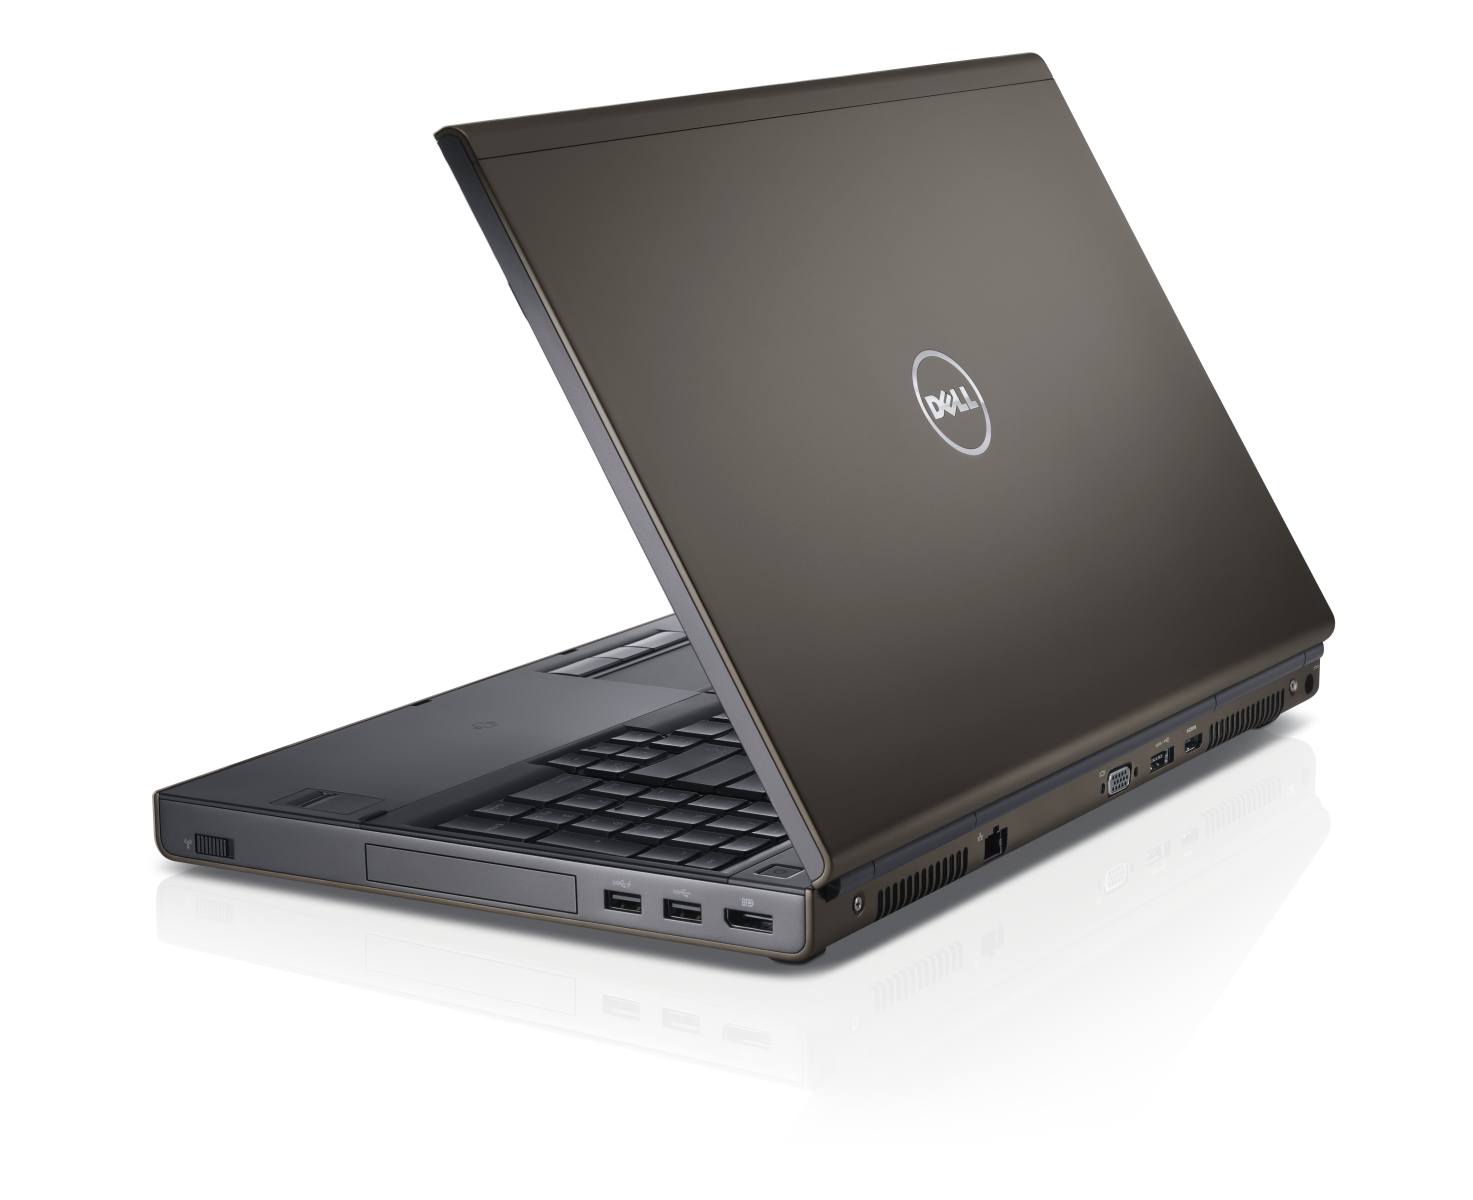 DELL PRECISION M4800 - WORKSTATION LAPTOP - SURFACE ZONE